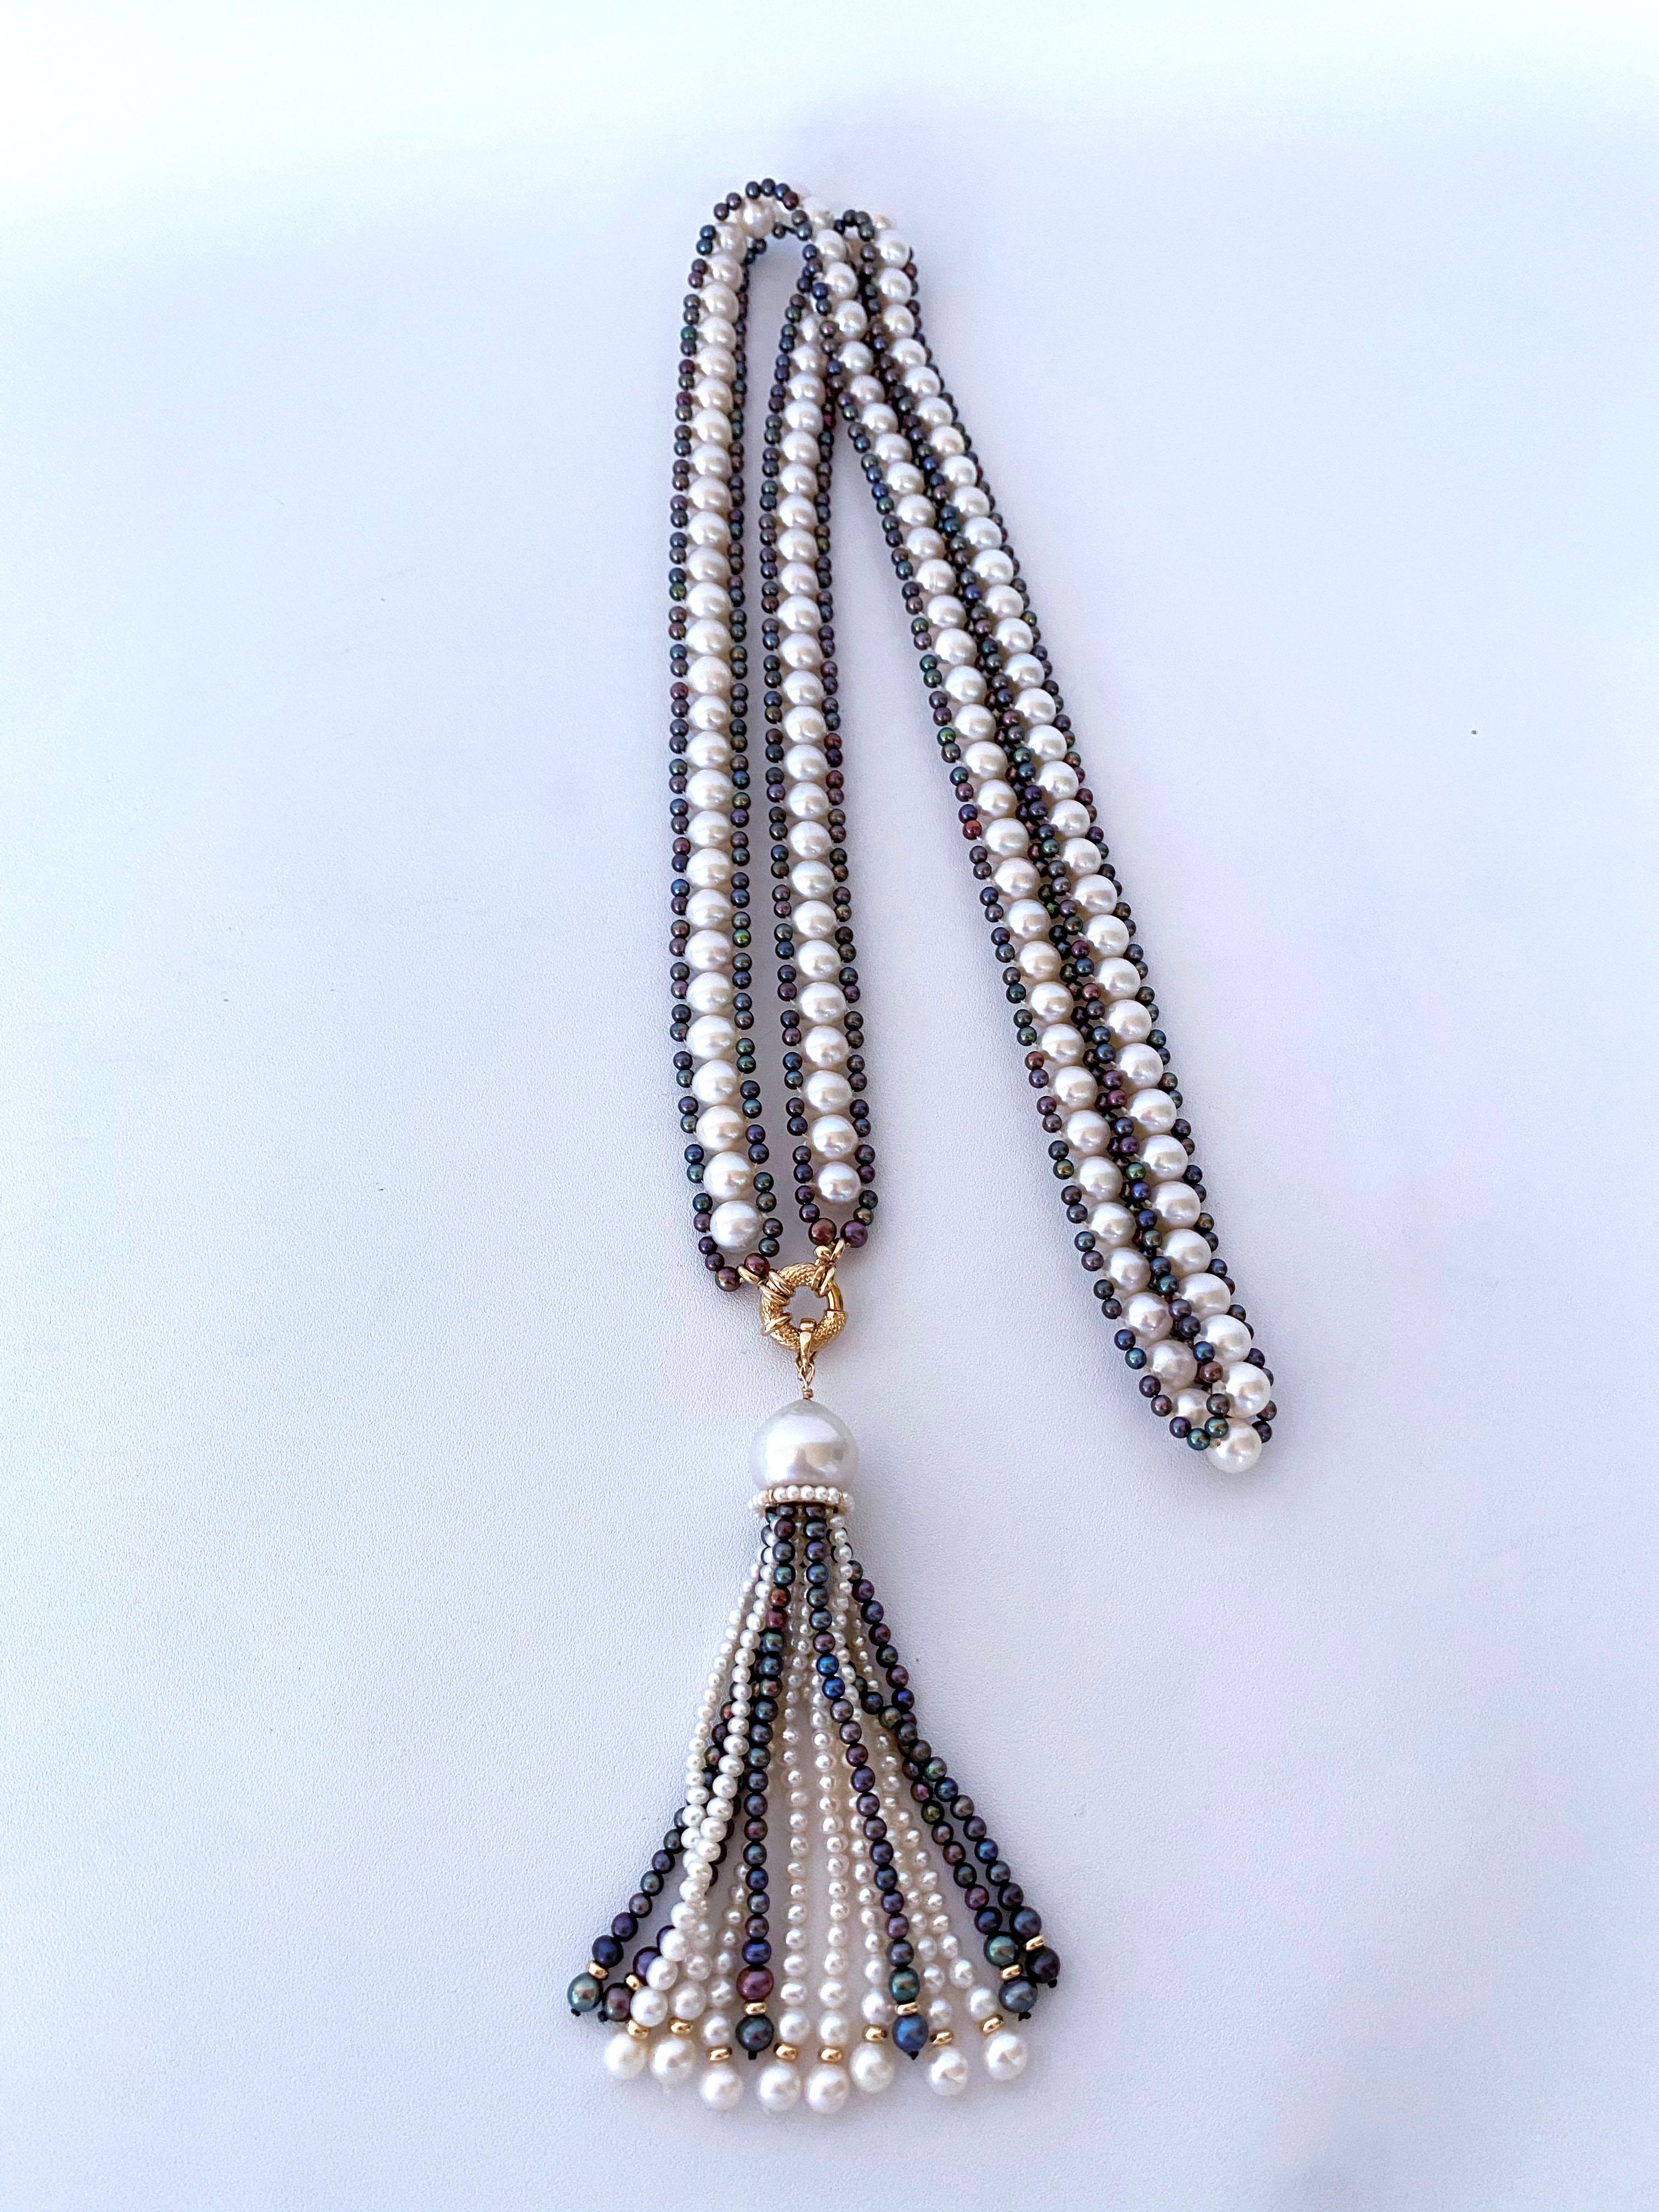 Beautiful and classic piece by Marina J. This Sautoir is woven with all cultured Pearls which display a great luster and sheen. The small Black Pearls lining this Sautoir all have an 